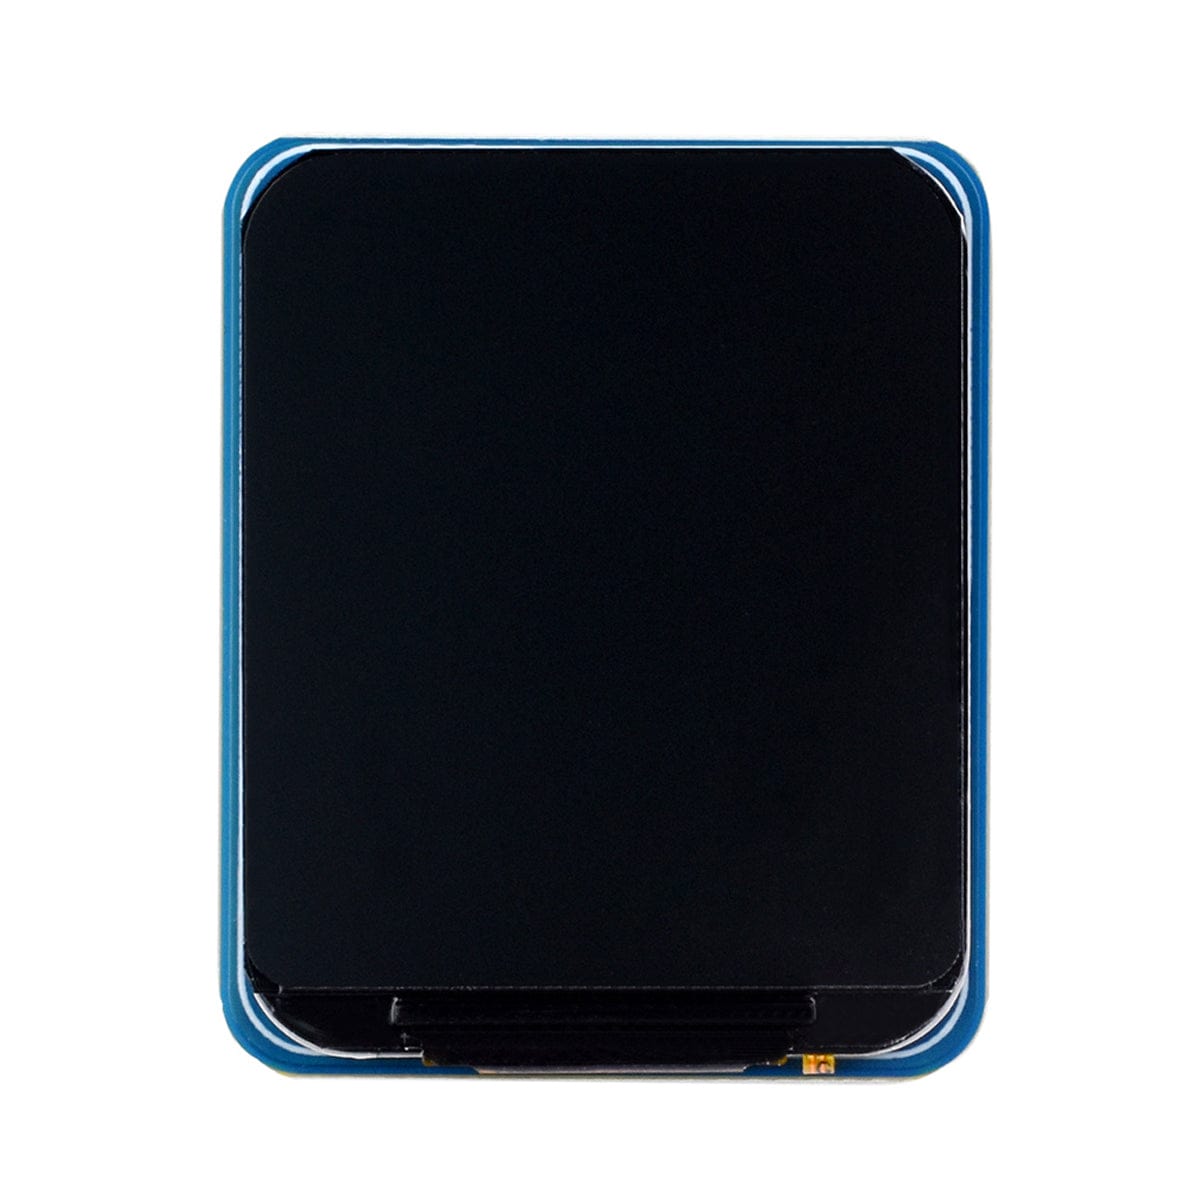 1.5" Rounded IPS LCD Display Module (240 x 280) - The Pi Hut